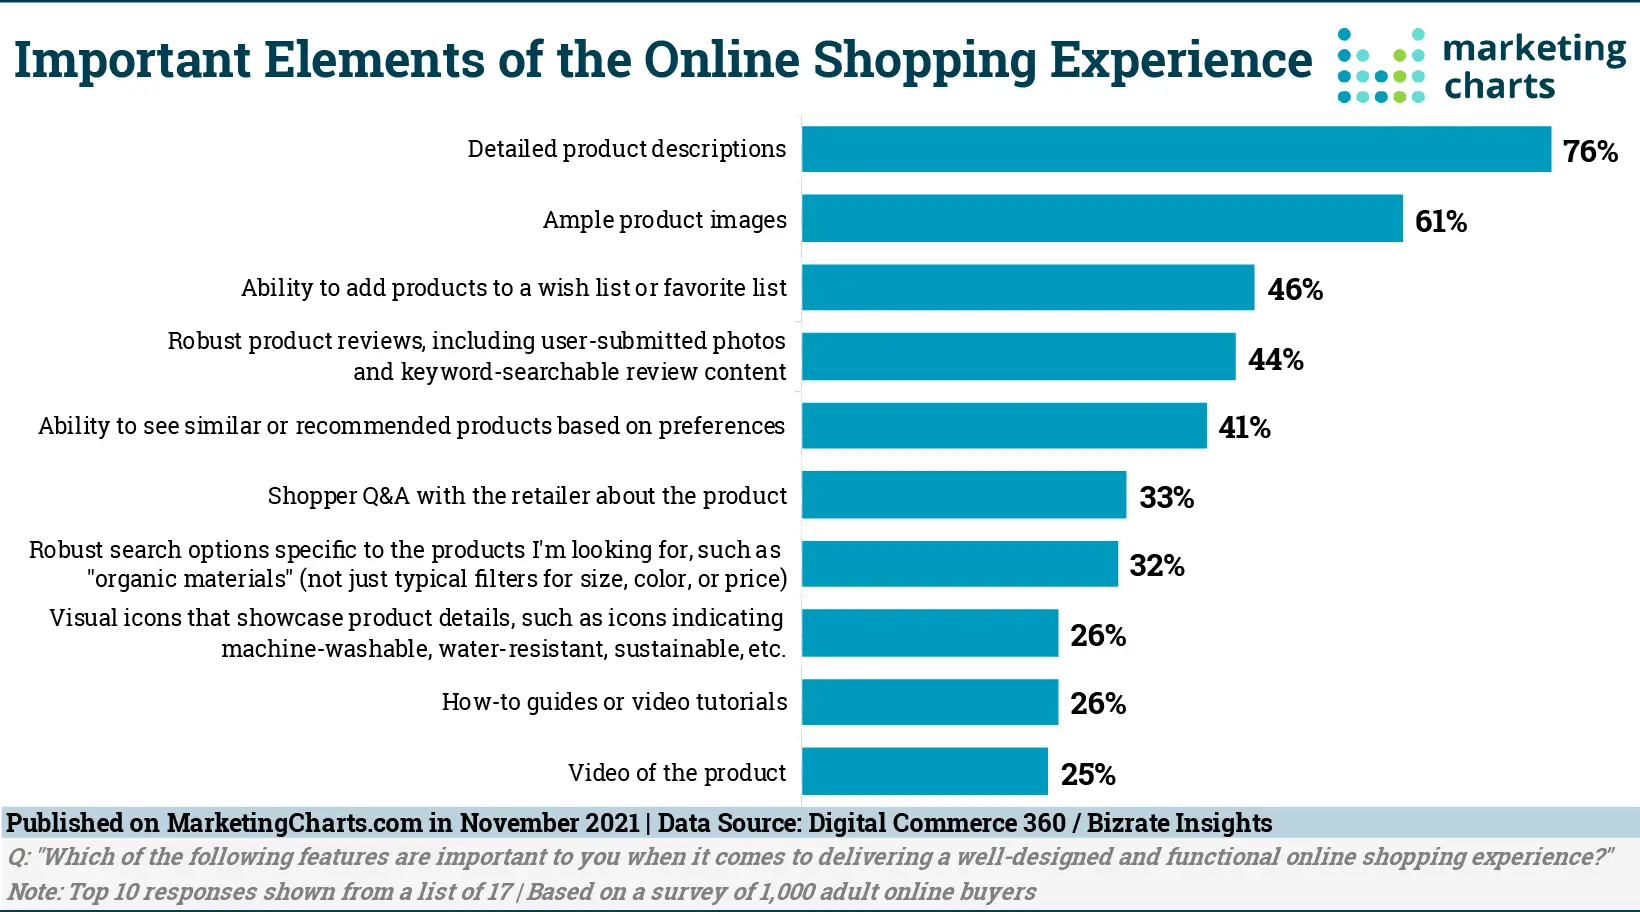 Important elements of the online shopping experience.